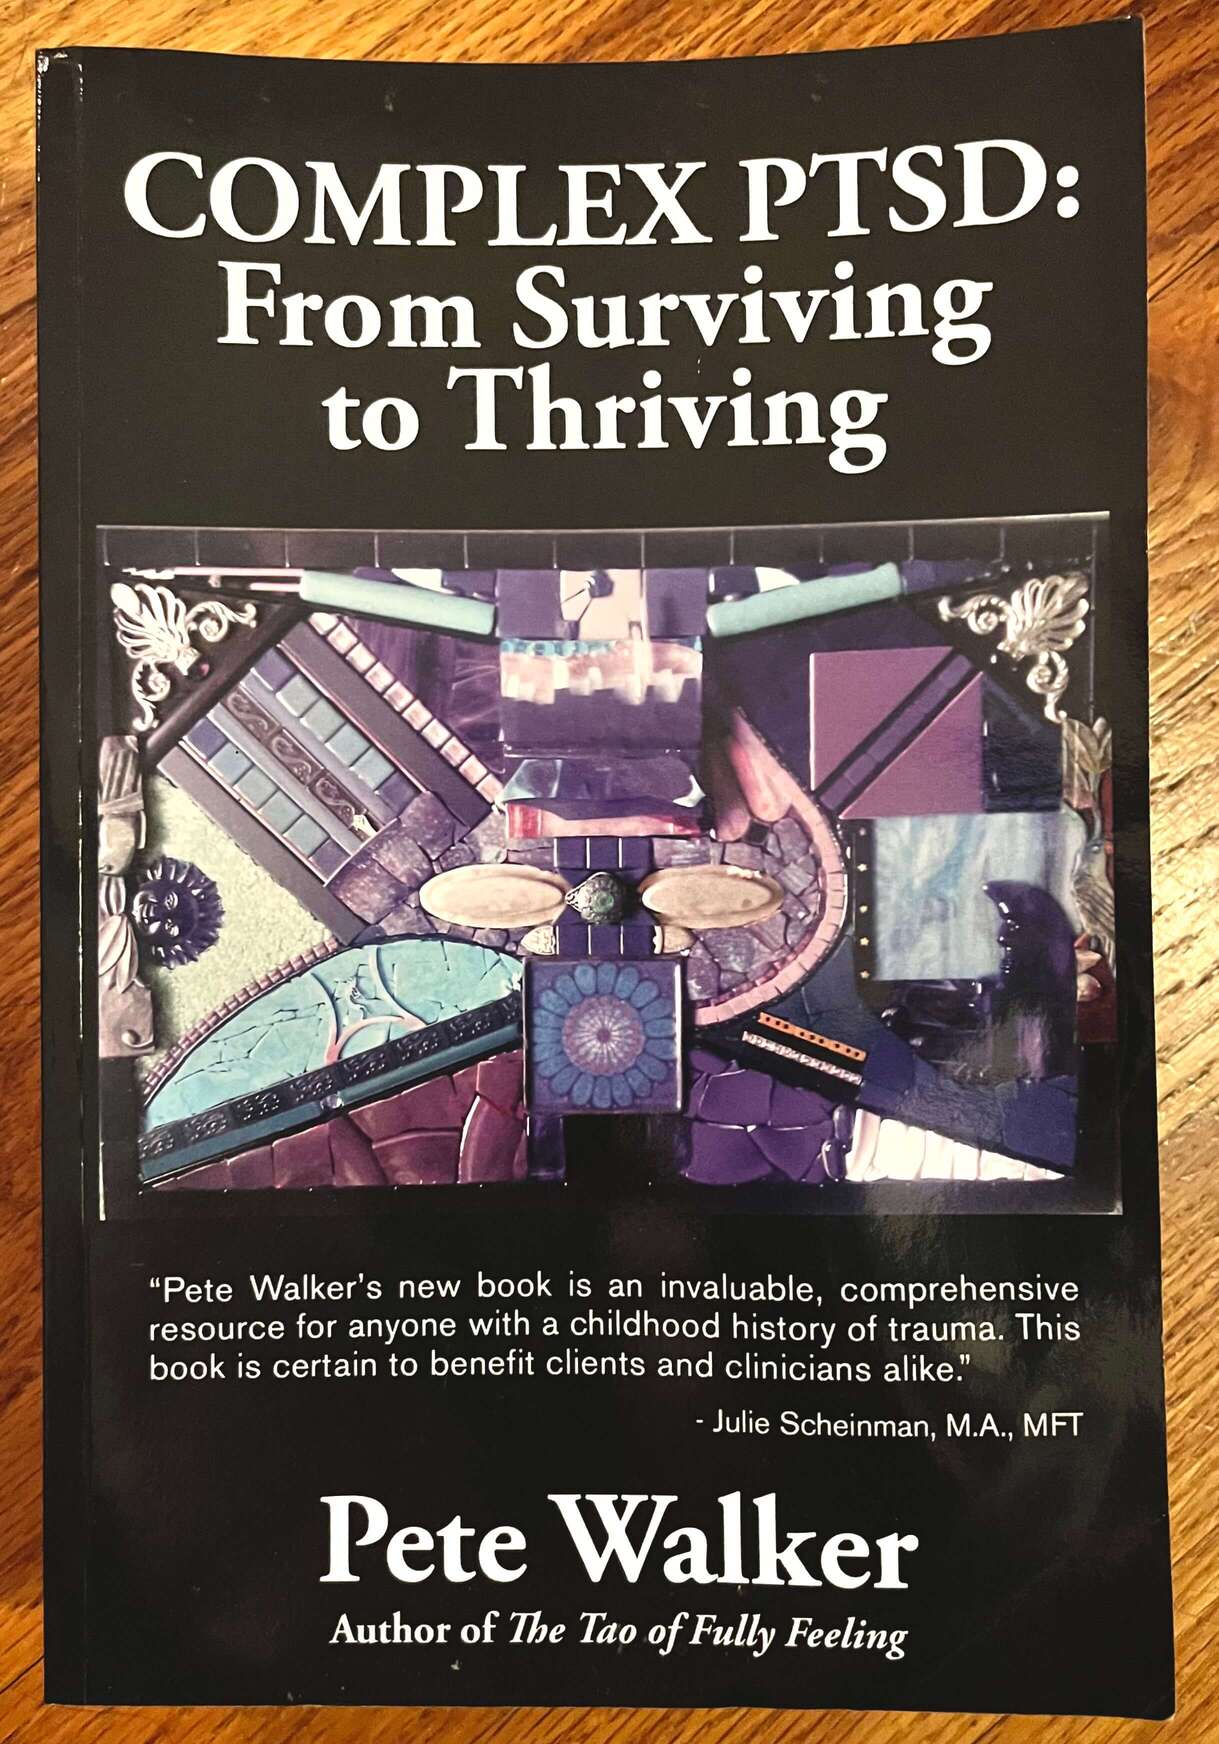 “Complex PTSD: From Surviving to Thriving” by Pete Walker.